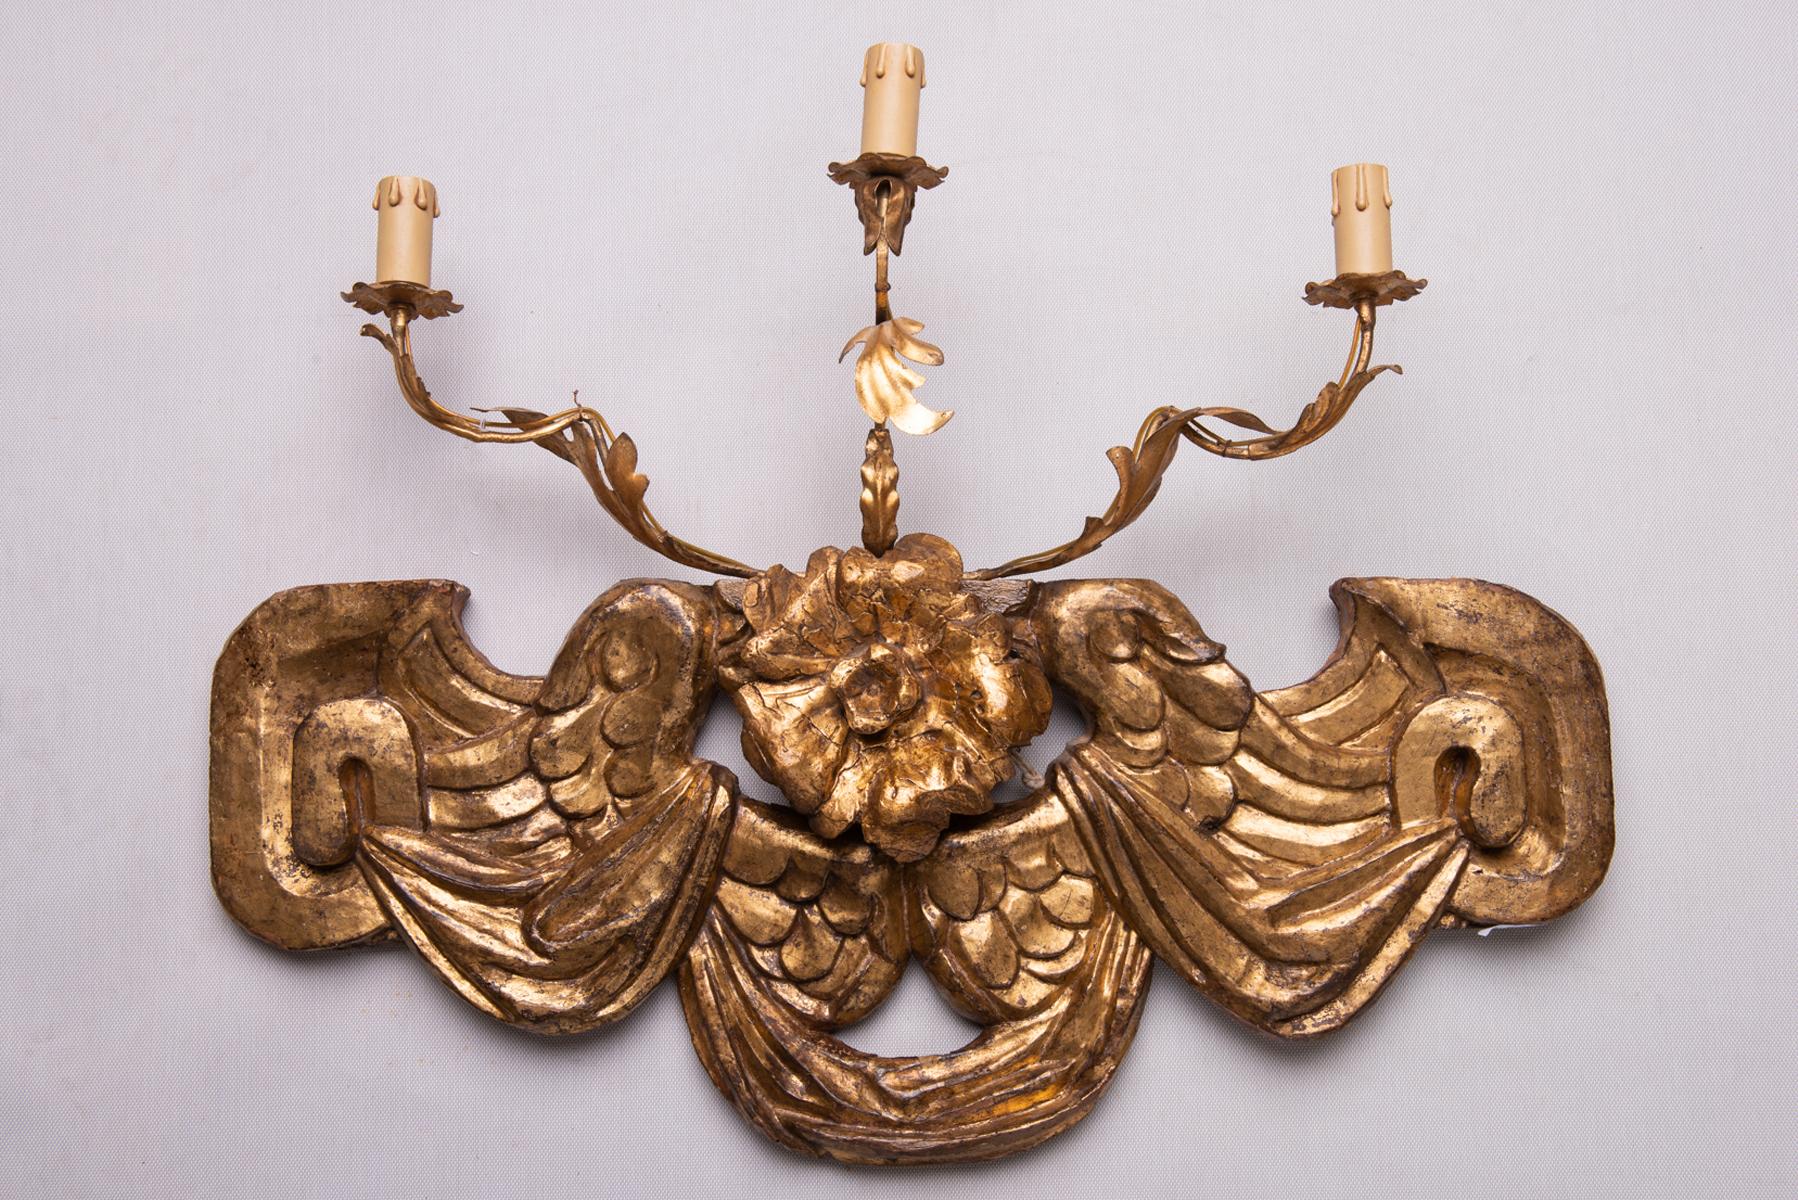 O/6993 -  Wall lamp with antique frieze in gilded wood. Fan with dried flowers on papier-maché and on parchment - 3 bulbs.
On the wall it is a real illuminated sculpture ! The fan measures: width cm. 86,5 x height.35 x depth 27,5 cm.
There are only